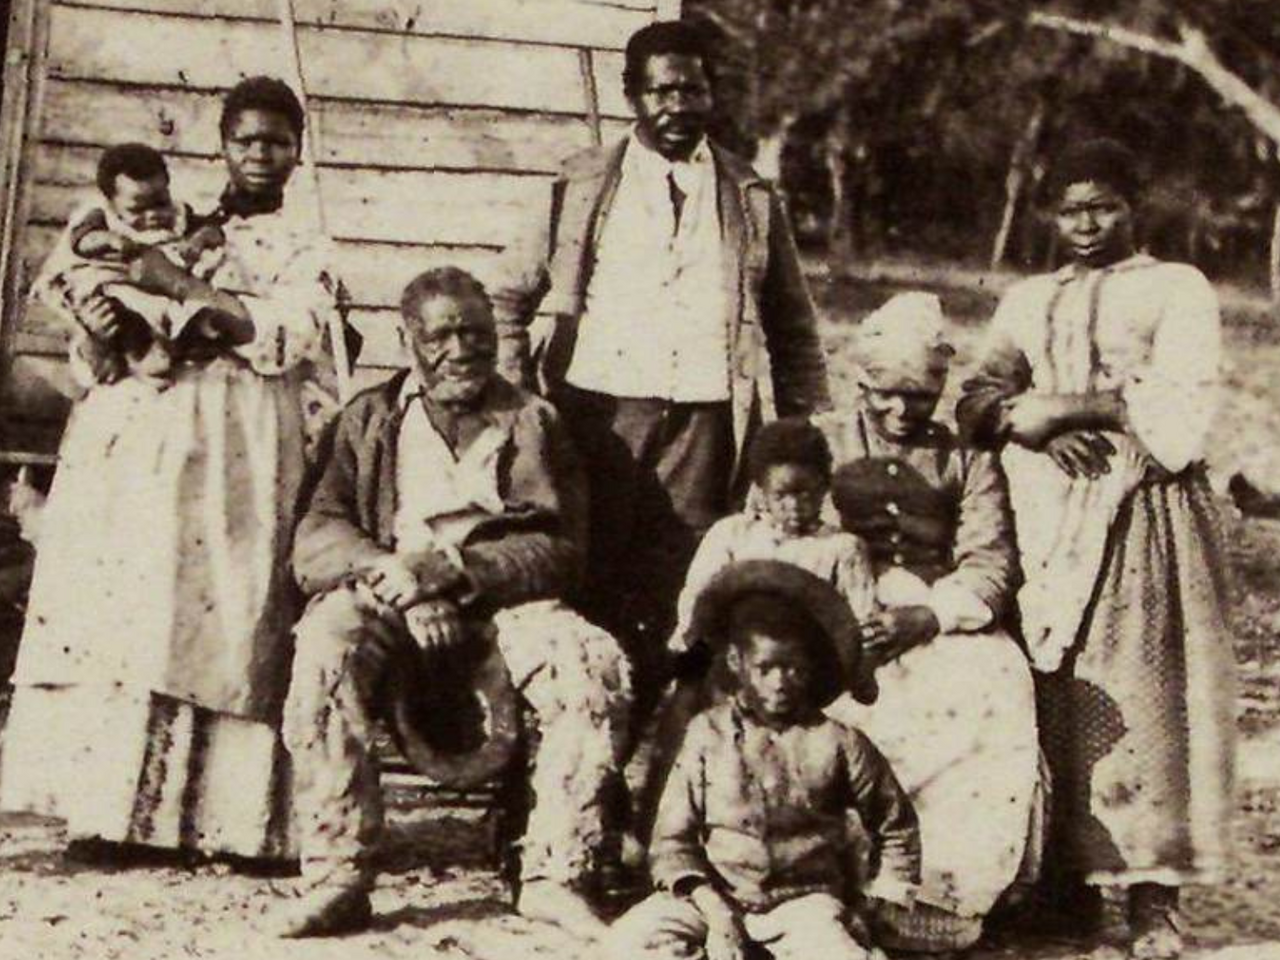 Photograph taken during Reconstruction Era showing five generations of African-Americans